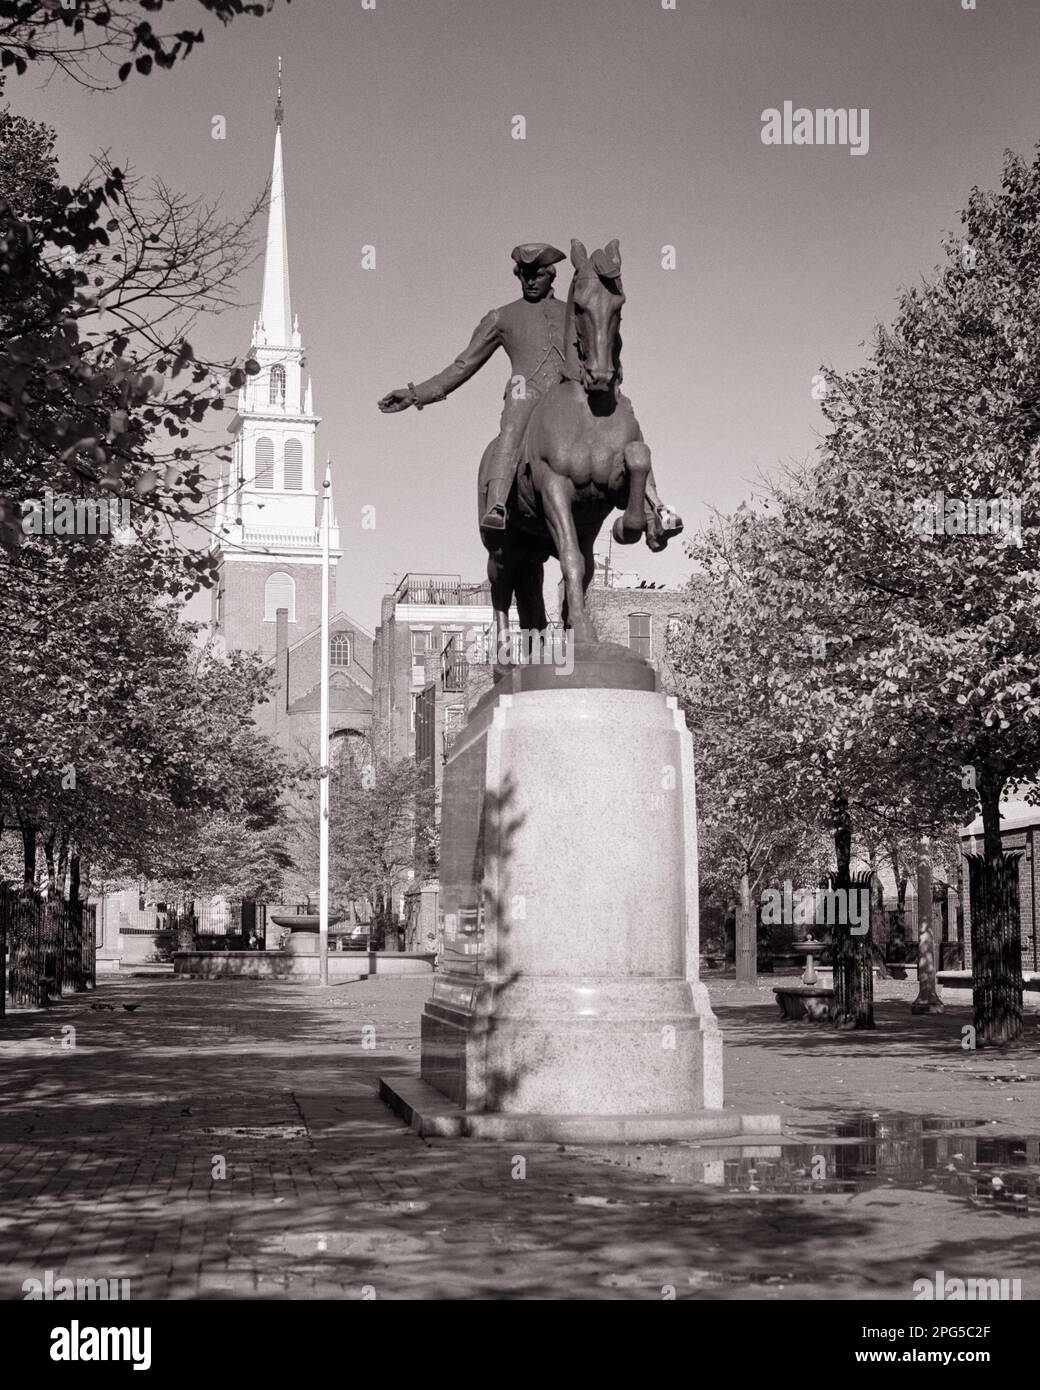 1950s PAUL REVERE STATUE AND OLD NORTH CHURCH BOSTON MASSACHUSETTS USA - h2513 HAR001 HARS FREEDOM NORTH AMERICAN WARS STRATEGY AND LEADERSHIP WAR OF INDEPENDENCE REVOLT AMERICAN REVOLUTIONARY WAR 1770s COLONIES HERO MA 1775 BLACK AND WHITE HAR001 OLD FASHIONED Stock Photo